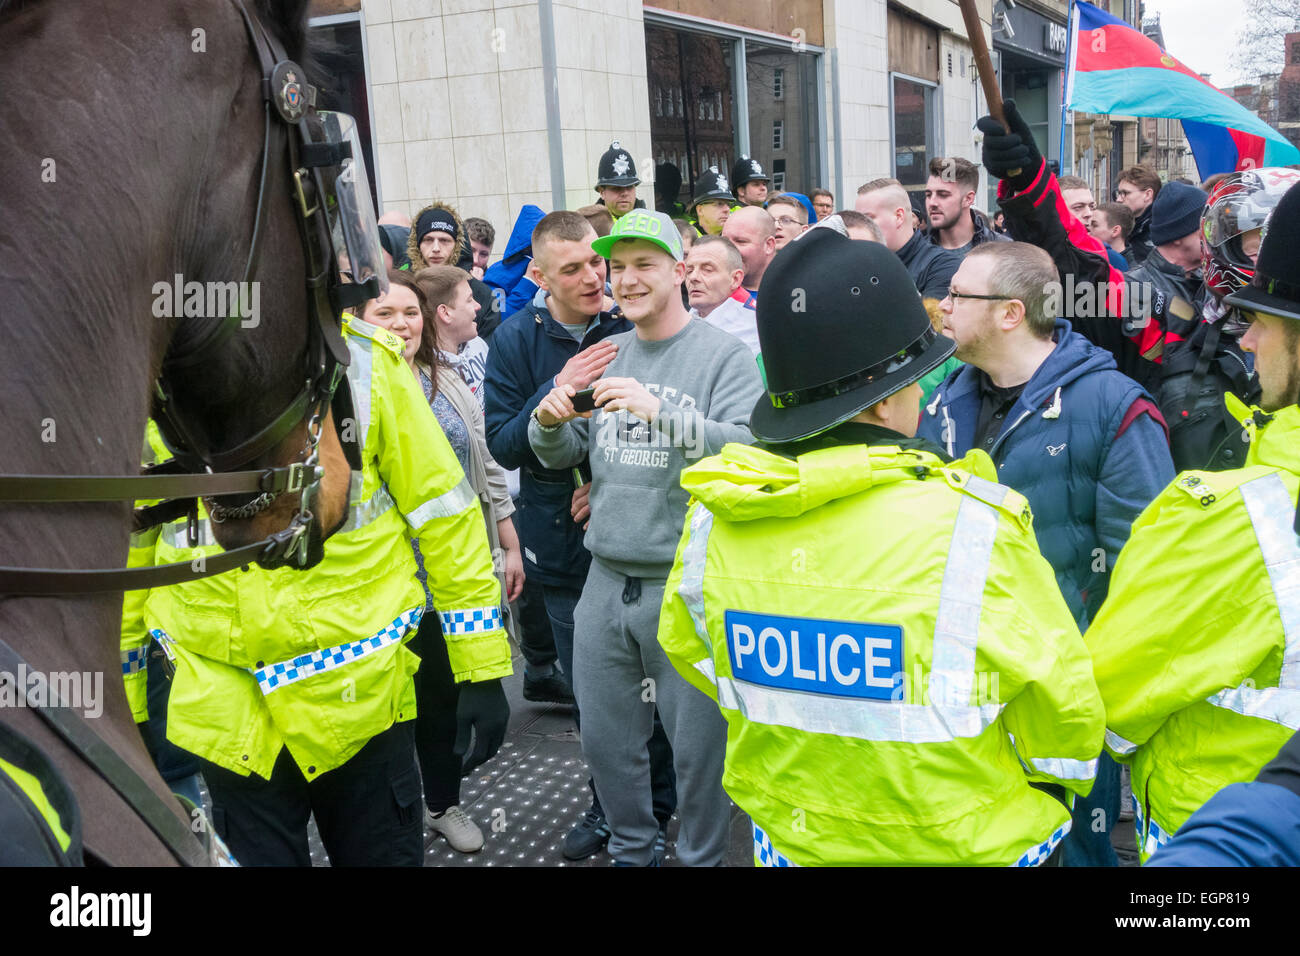 Newcastle upon Tyne, UK. 28th February, 2015. Police prevent Pegida protesters marching towards counter protest in nearby street at first UK protest by Pegida UK, a group opposed to the 'Islamisation of Europe'. The protest was held in The Bigg Market area of Newcastle city centre, while a counter protest organised by Newcastle Unites was held less than a hundred metres away in Newgate Street Credit:  ALANDAWSONPHOTOGRAPHY/Alamy Live News Stock Photo